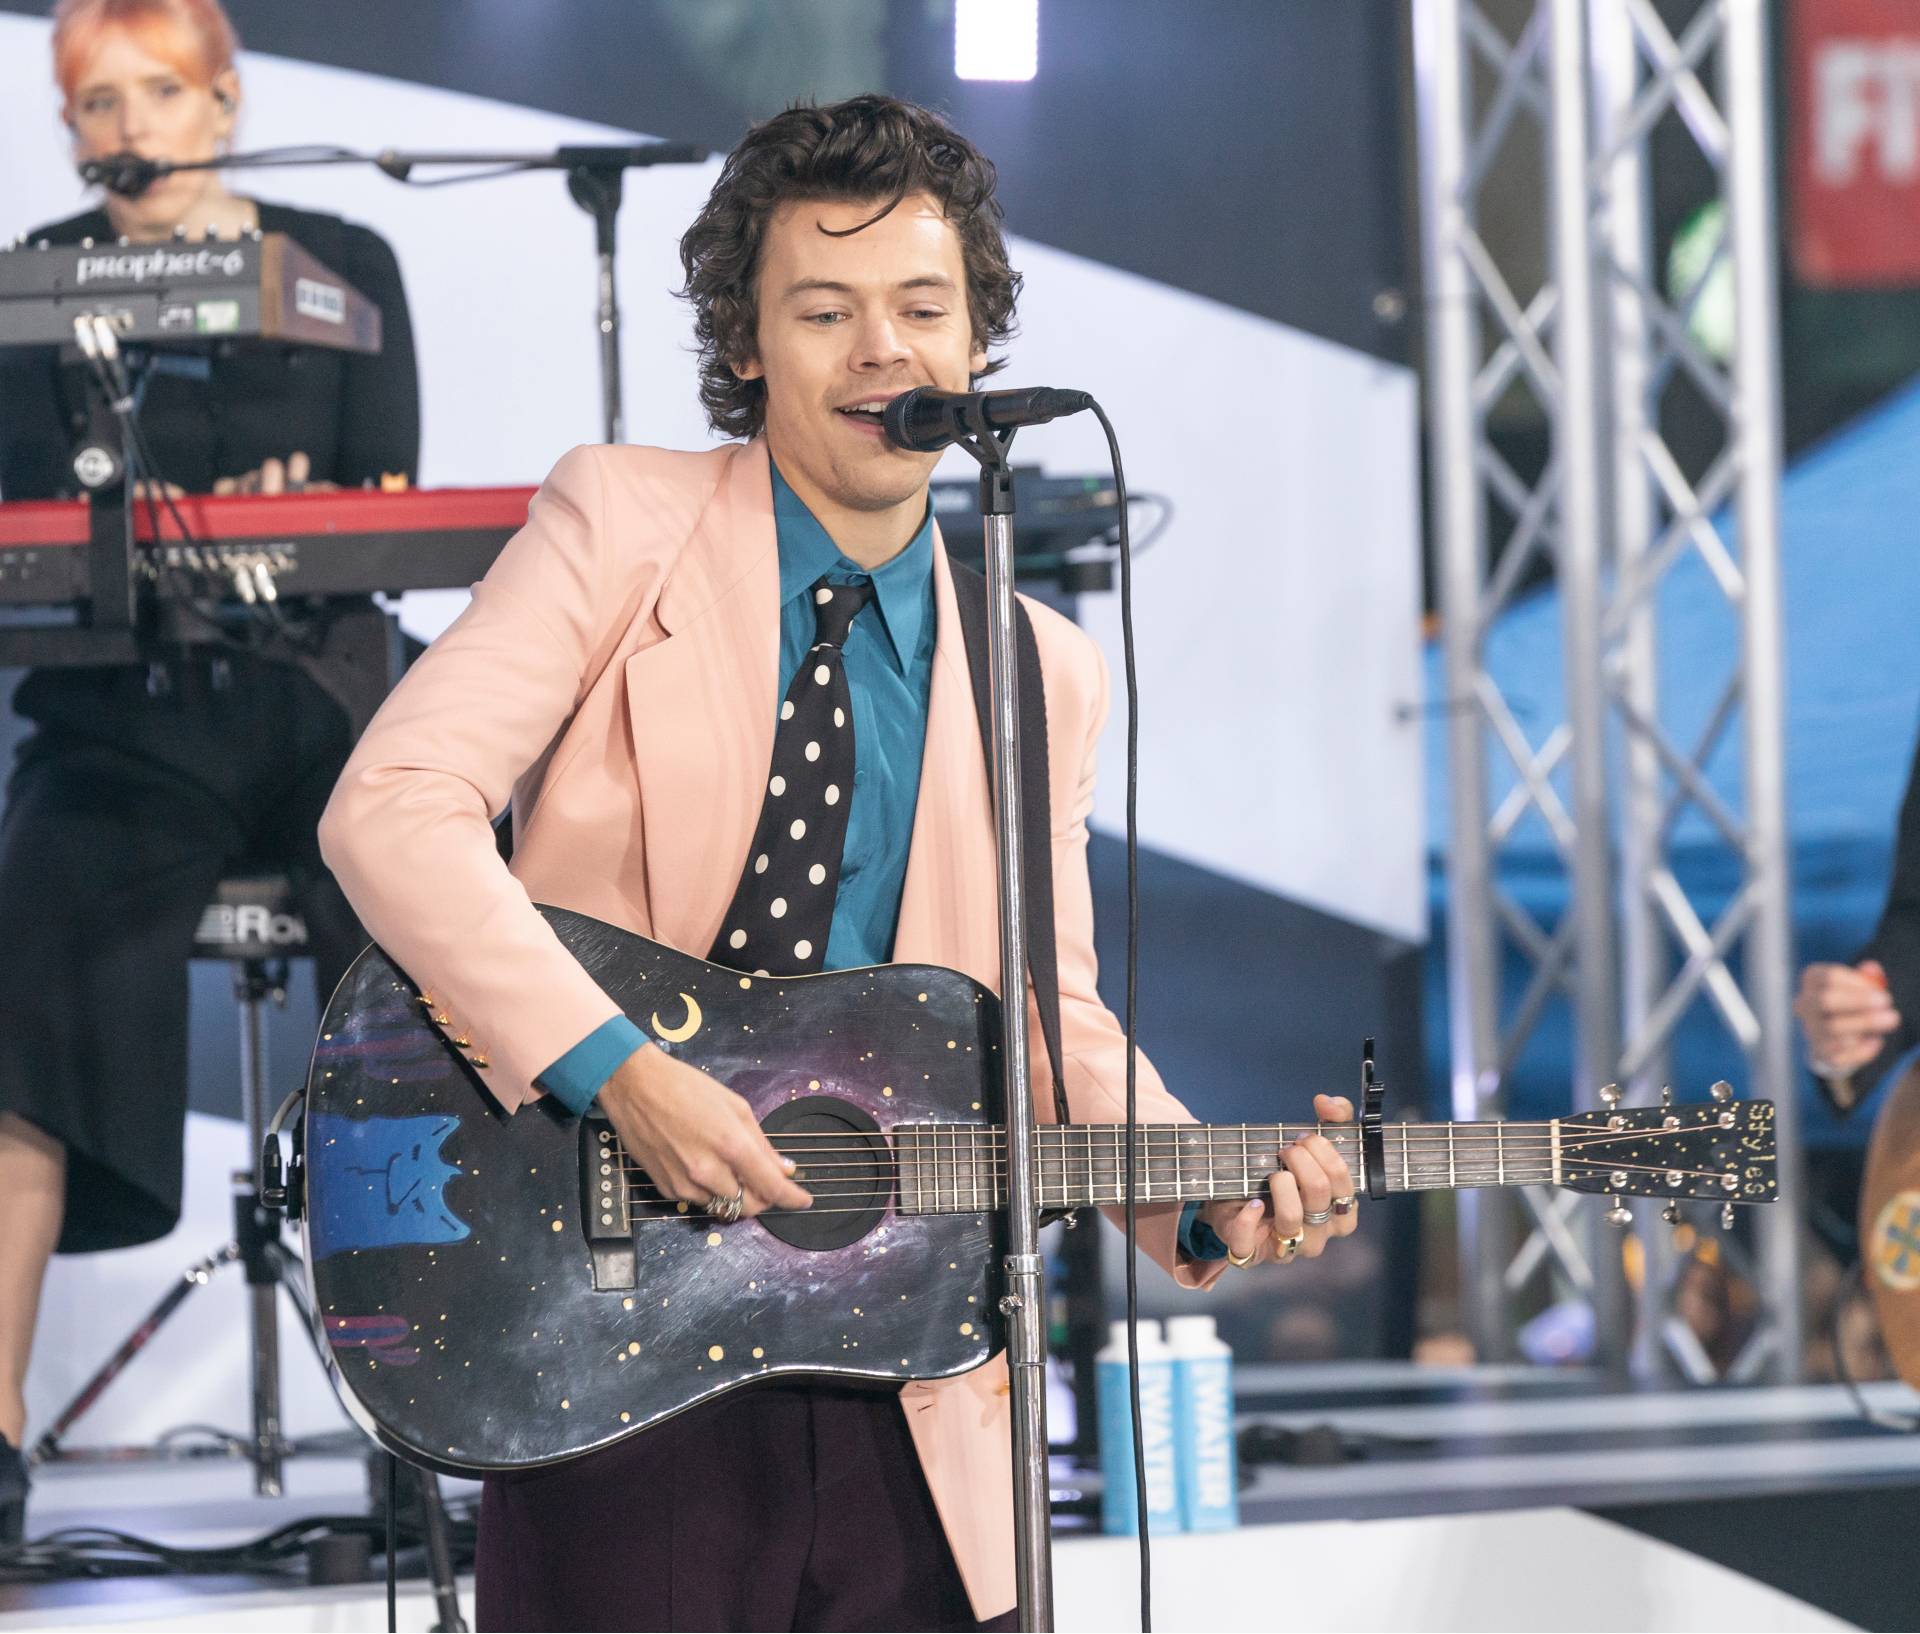 What's hot: Harry Styles' new album due late May